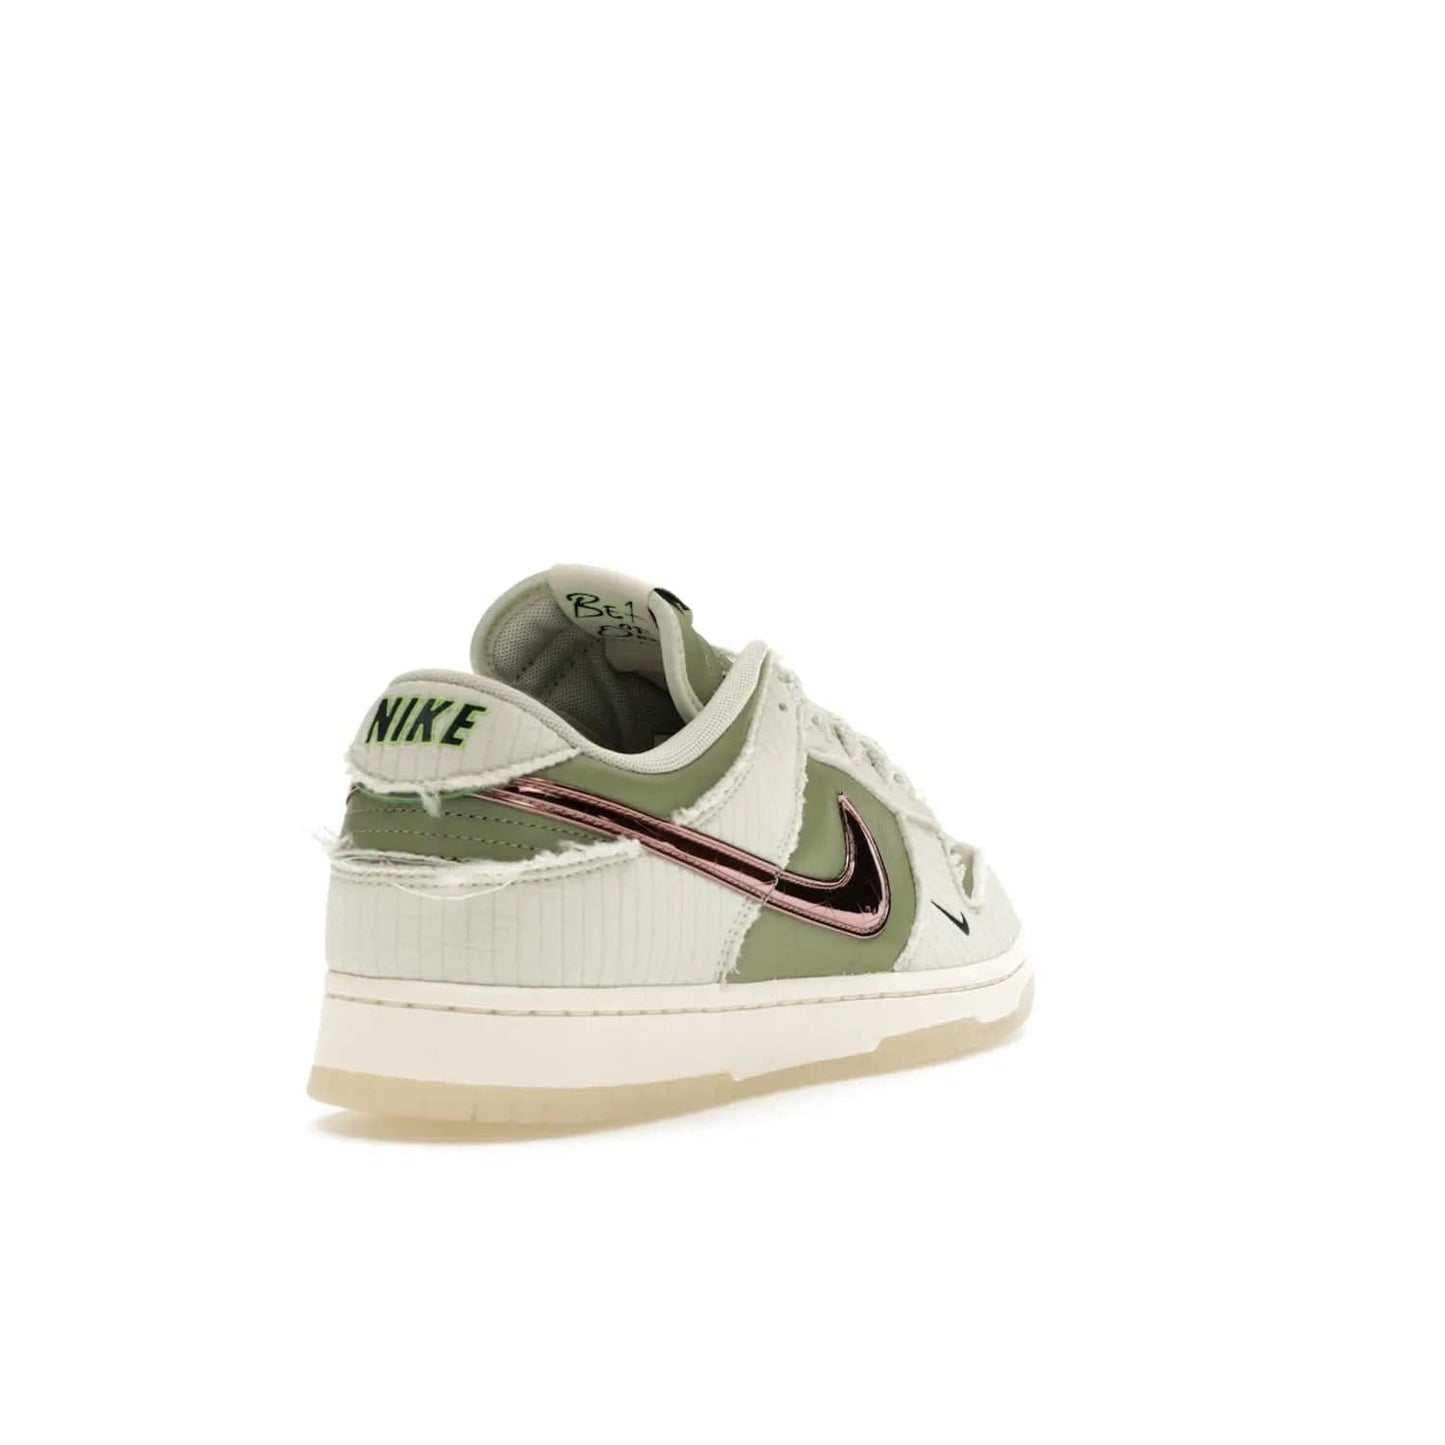 Nike Dunk Low Retro PRM Kyler Murray Be 1 of One - Image 31 - Only at www.BallersClubKickz.com - Introducing the Nike Dunk Low Retro PRM Kyler Murray "Be 1 of One"! A Sea Glass upper with Sail and Oil Green accents, finished with Rose Gold accents. Drop date: November 10th.